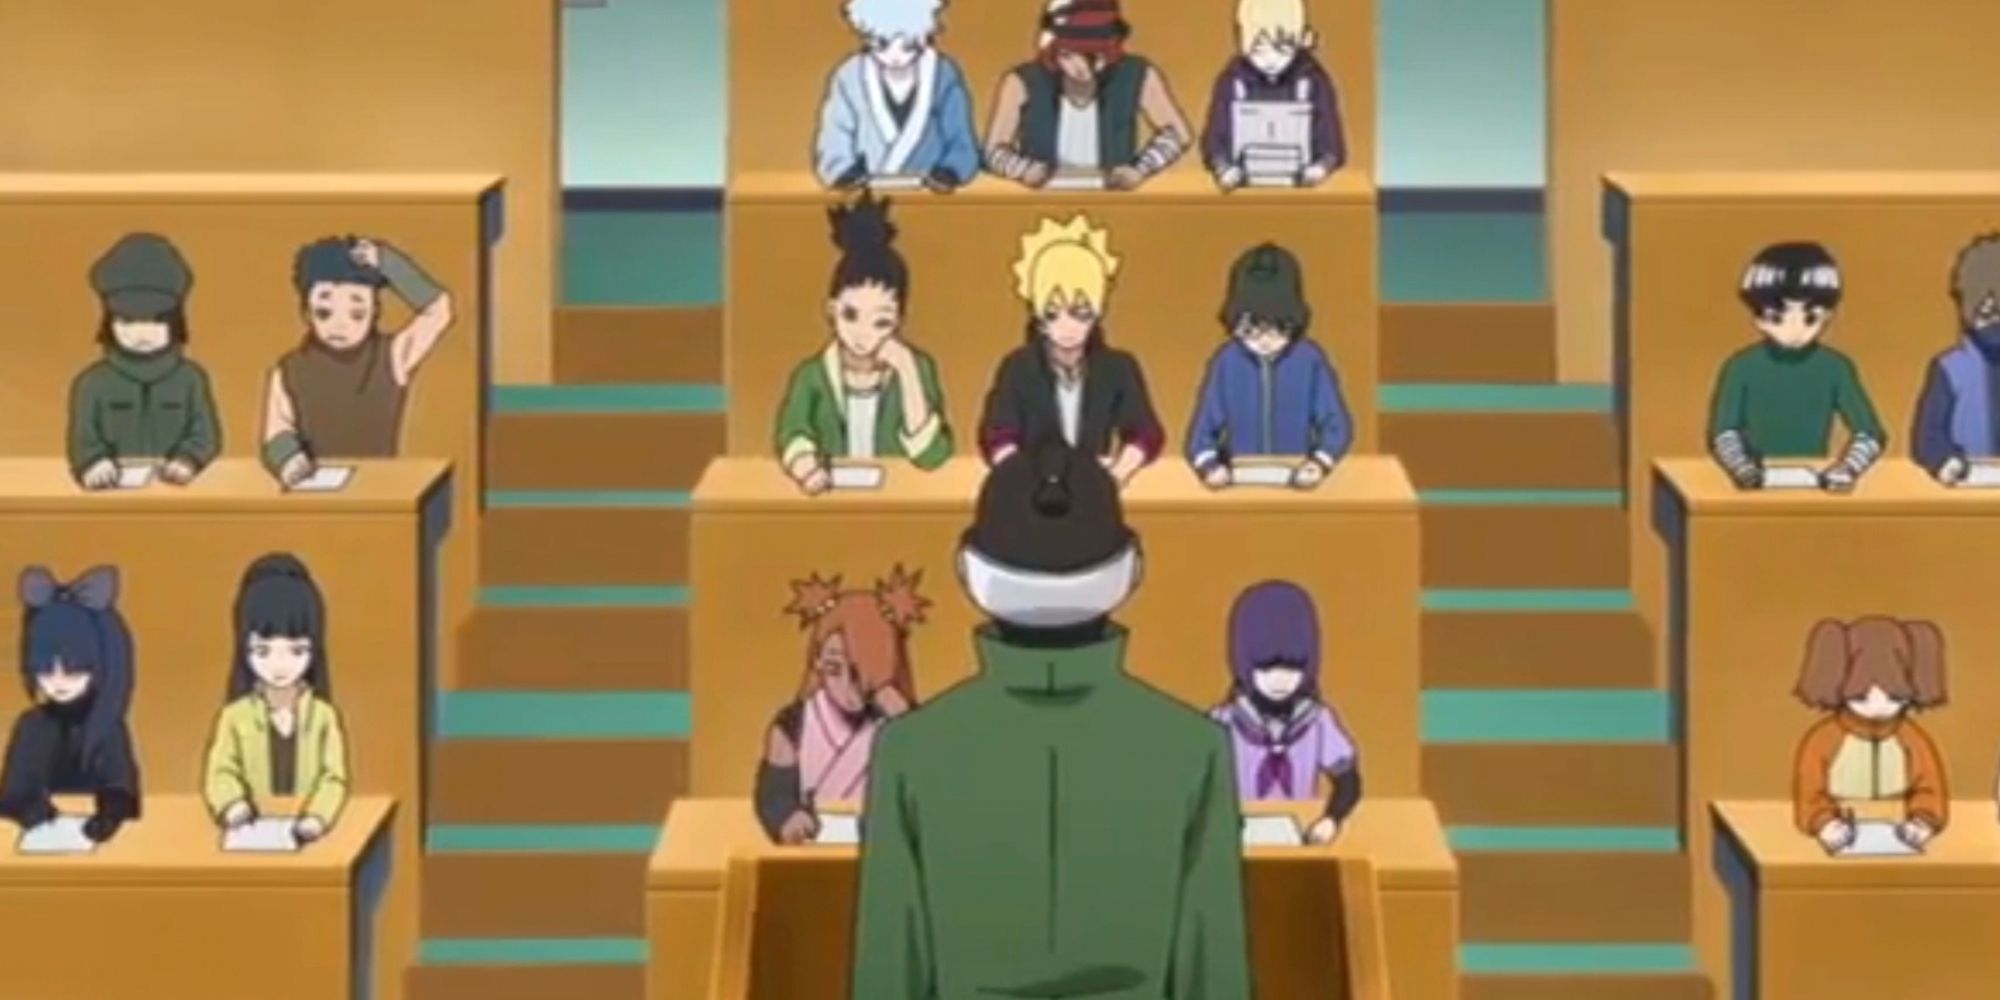 The class of genin sit in their Academy classroom in Boruto